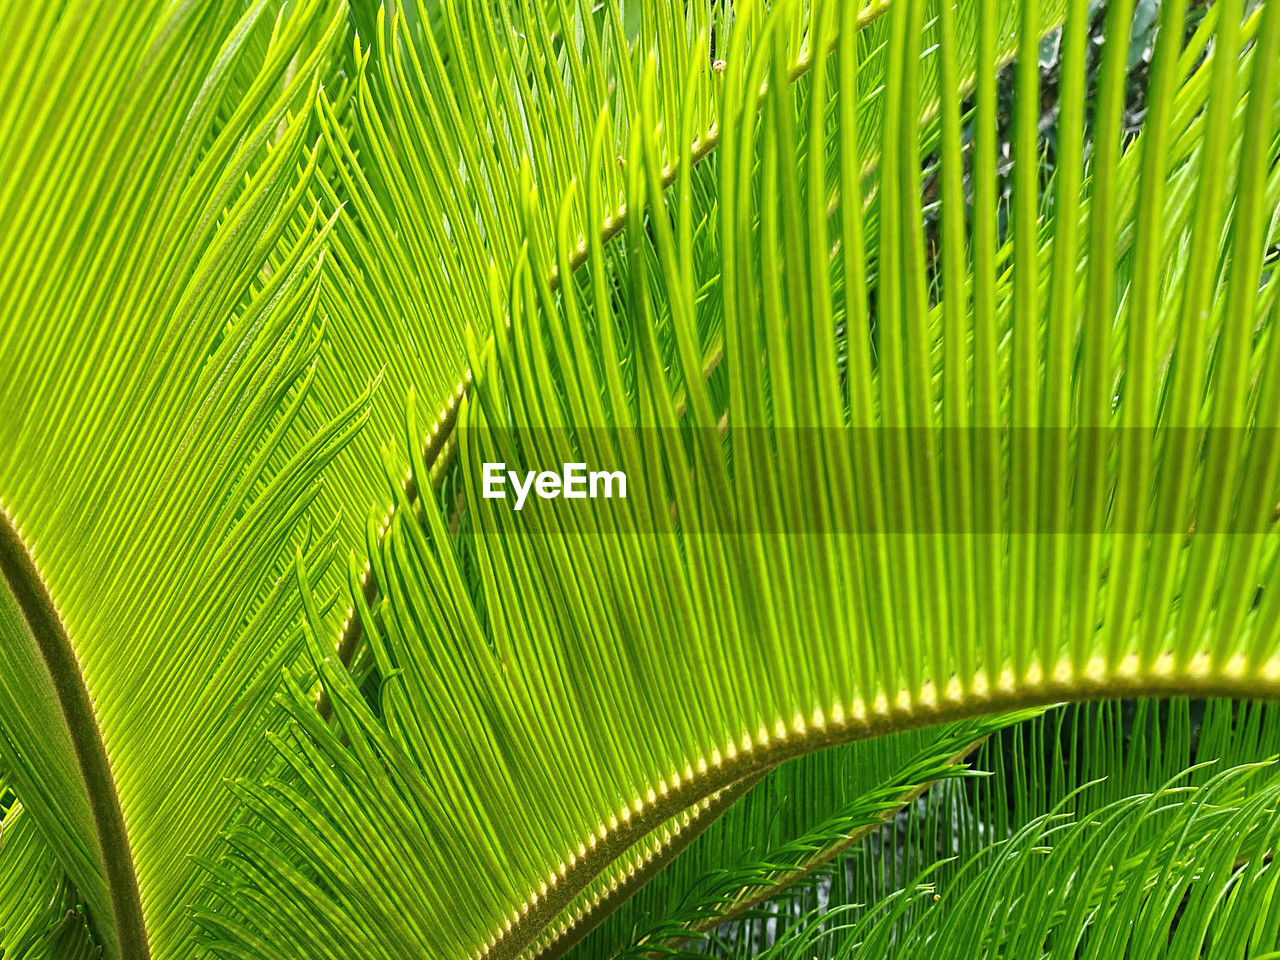 green, leaf, plant part, plant, growth, palm leaf, beauty in nature, palm tree, nature, backgrounds, no people, full frame, close-up, tropical climate, tree, pattern, flower, frond, day, freshness, outdoors, plant stem, lush foliage, foliage, botany, grass, leaves, sunlight